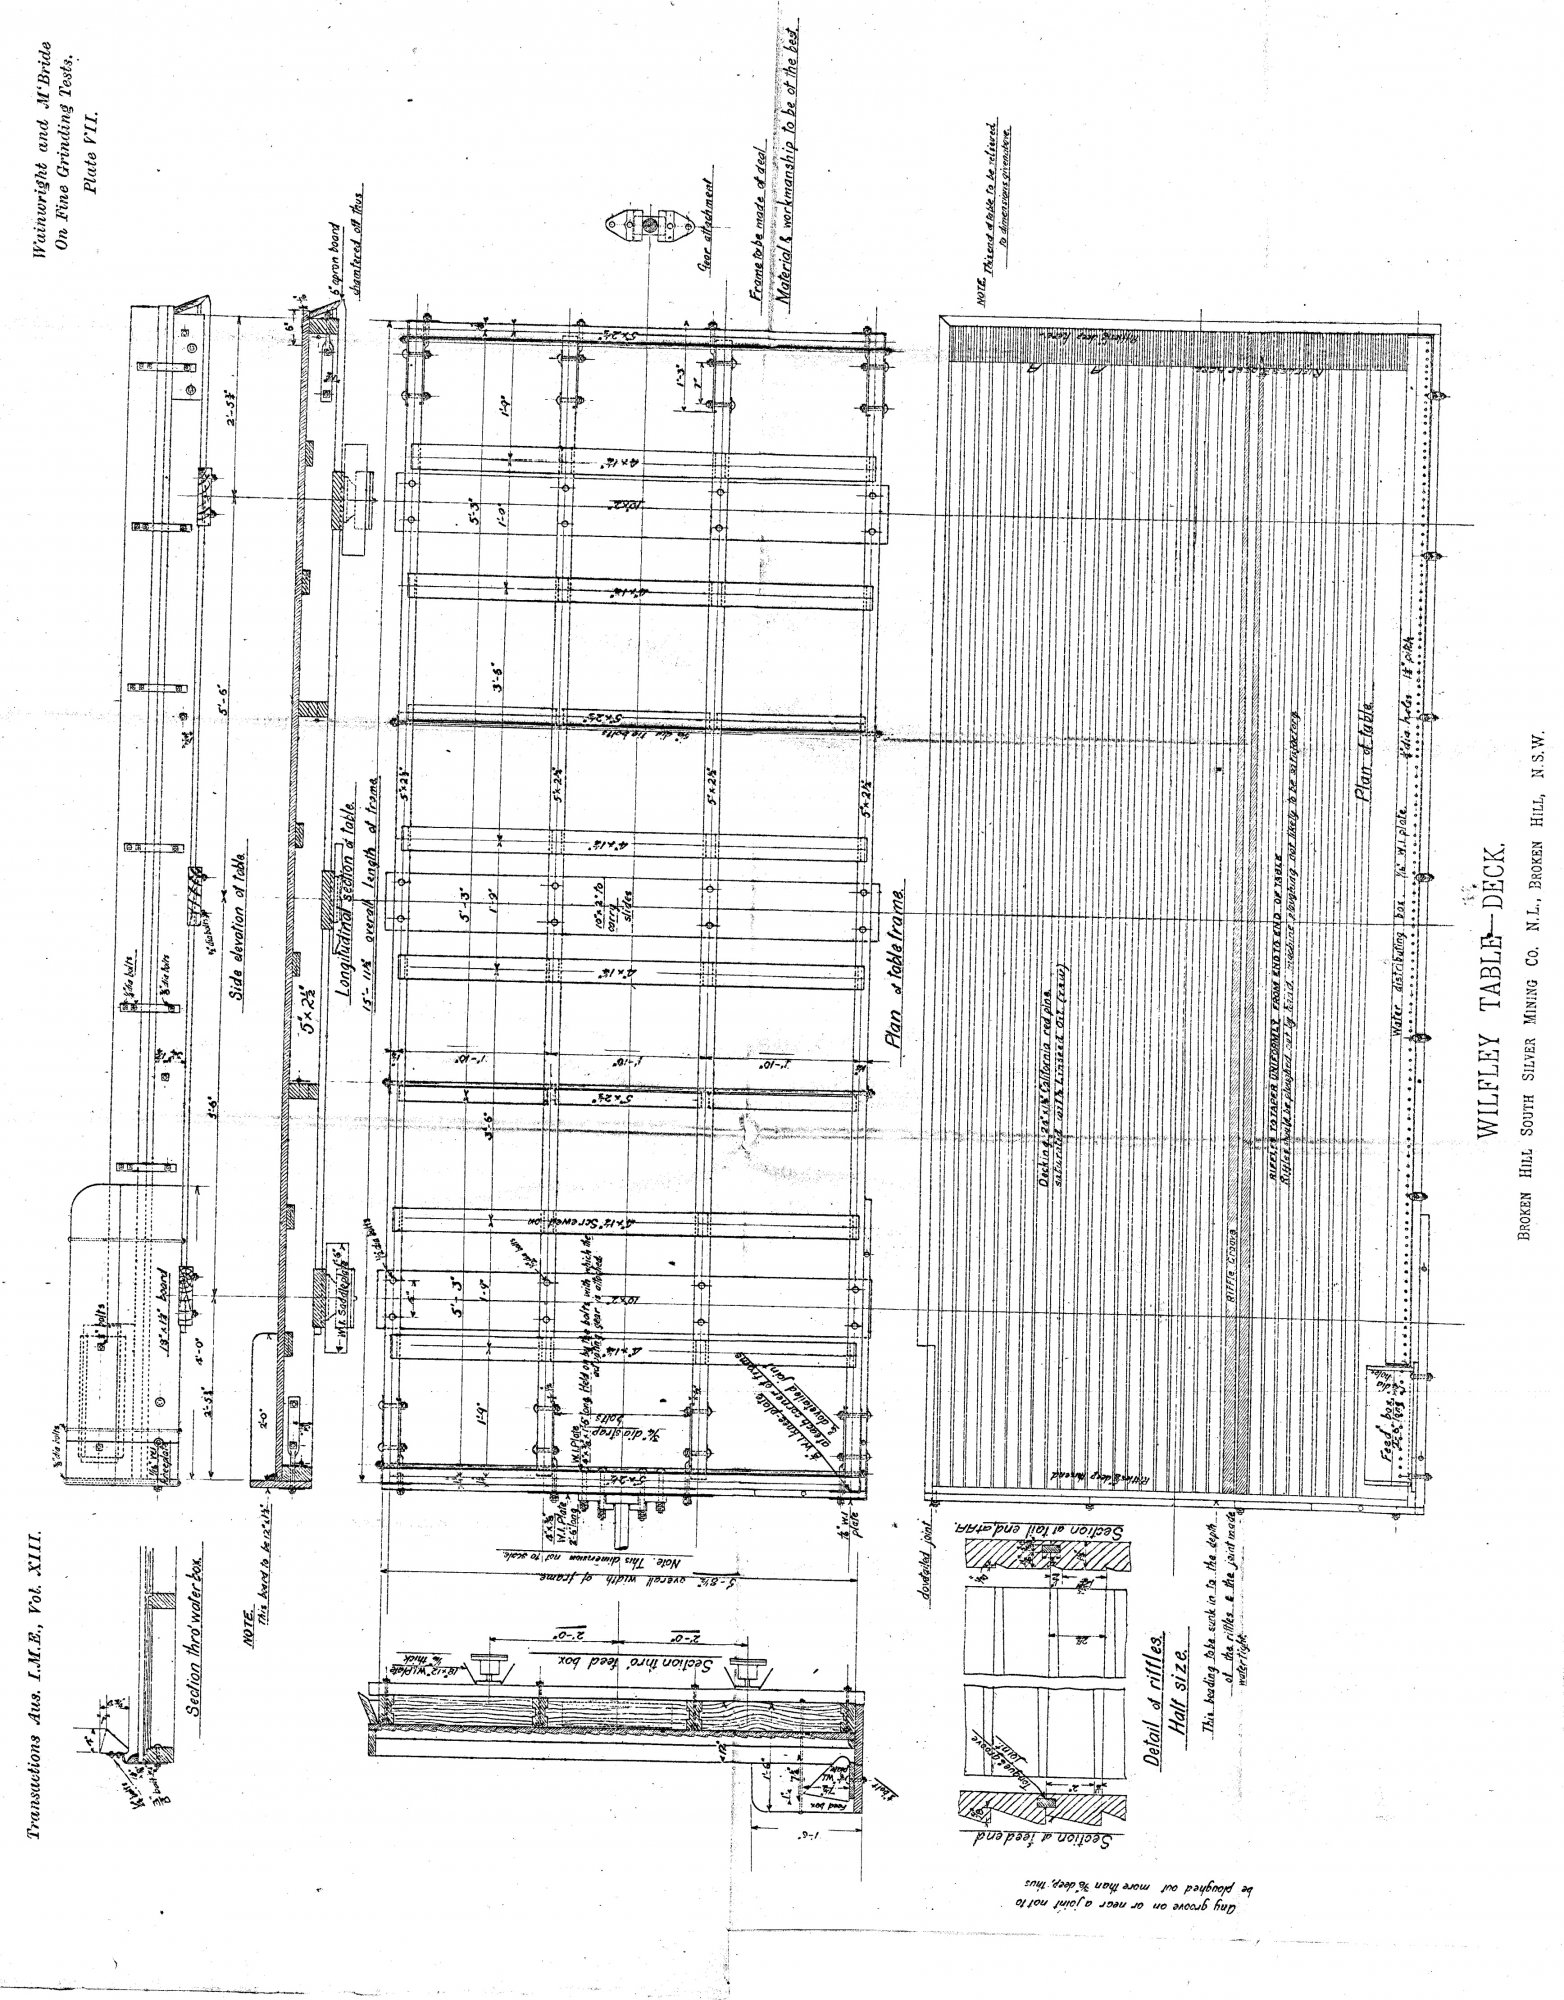 wilfley table fabrication drawings